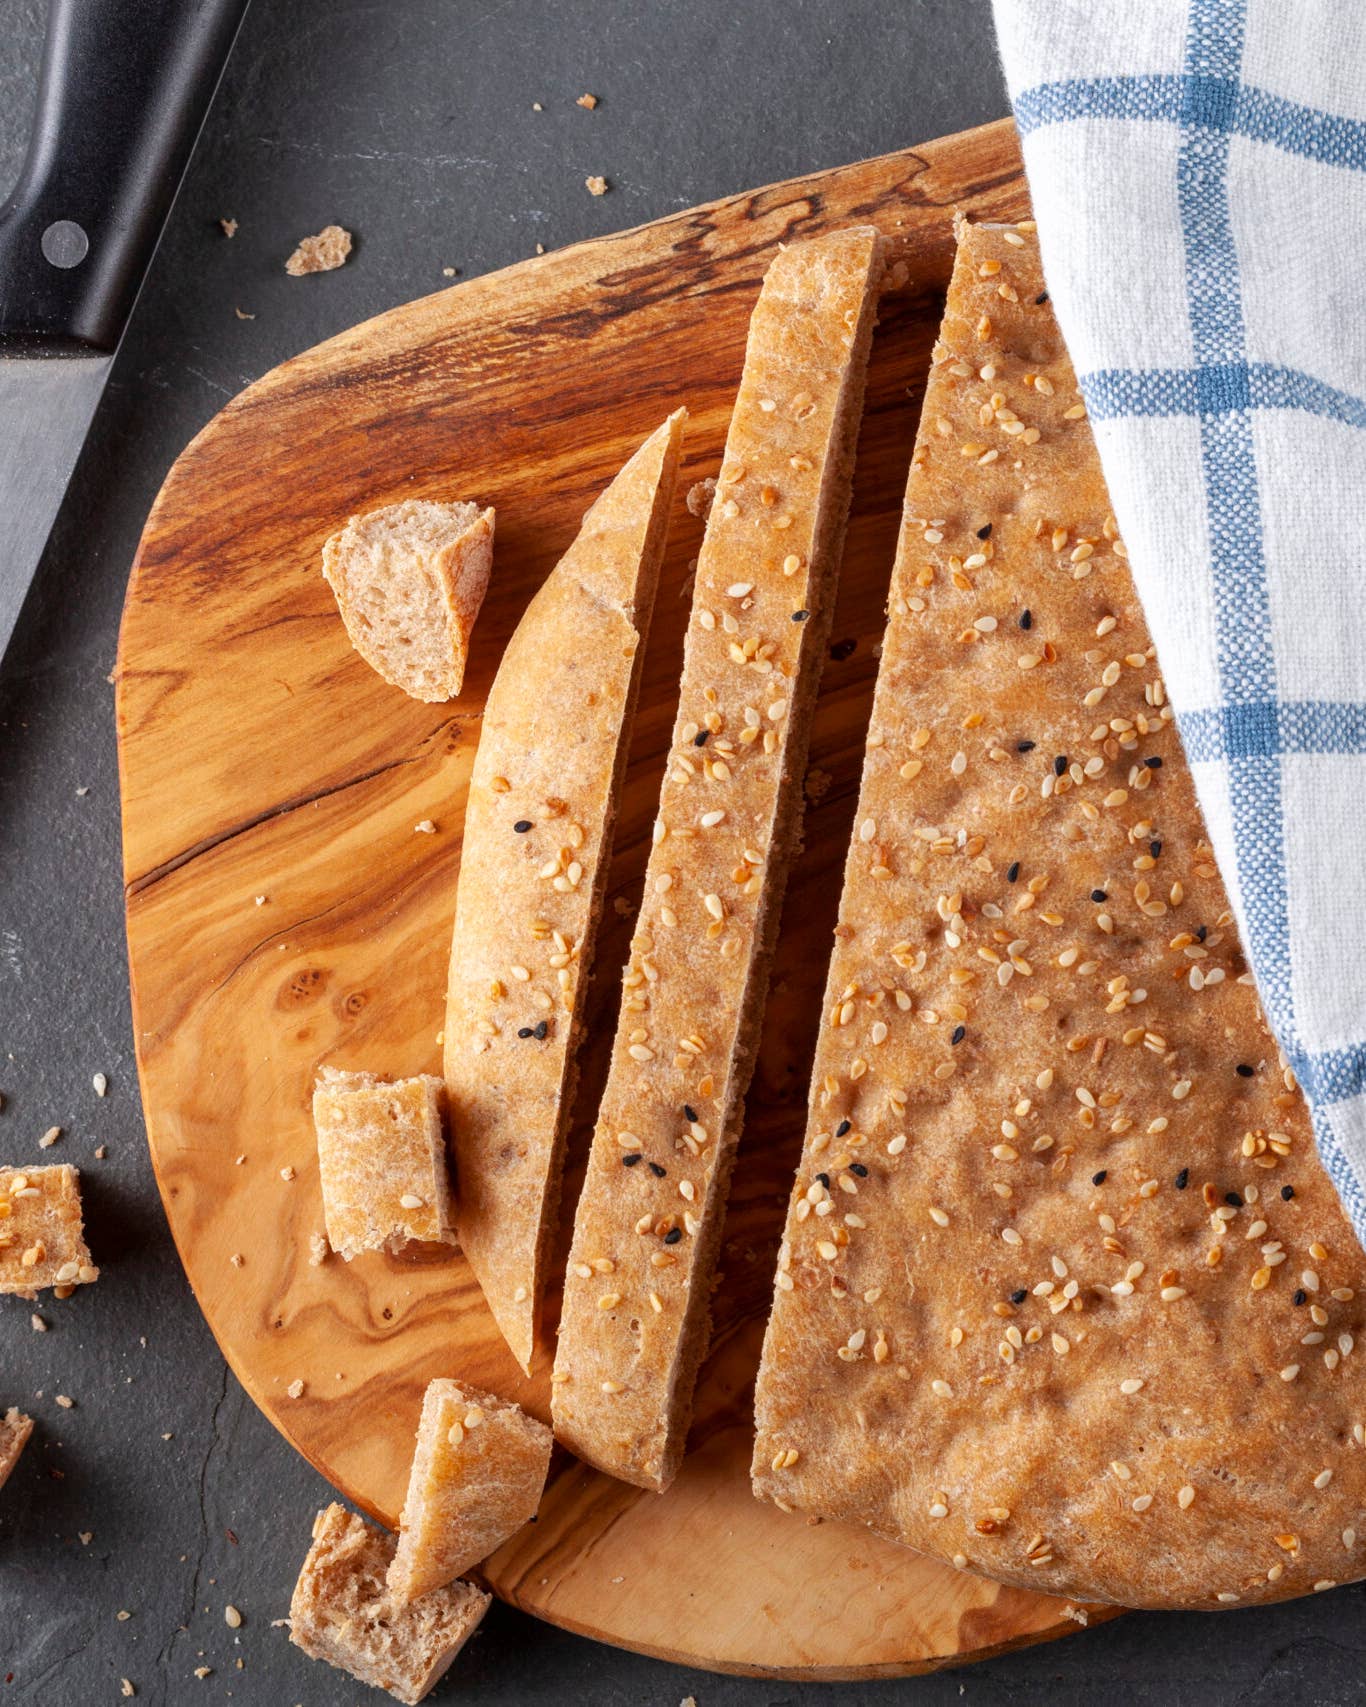 Flat lay image of Turkish Flat bread known as pide or pita on wooden chopping board. The wholegrain pita bread is round with poppy seeds and sesame seeds used as topping. It is diced and sliced